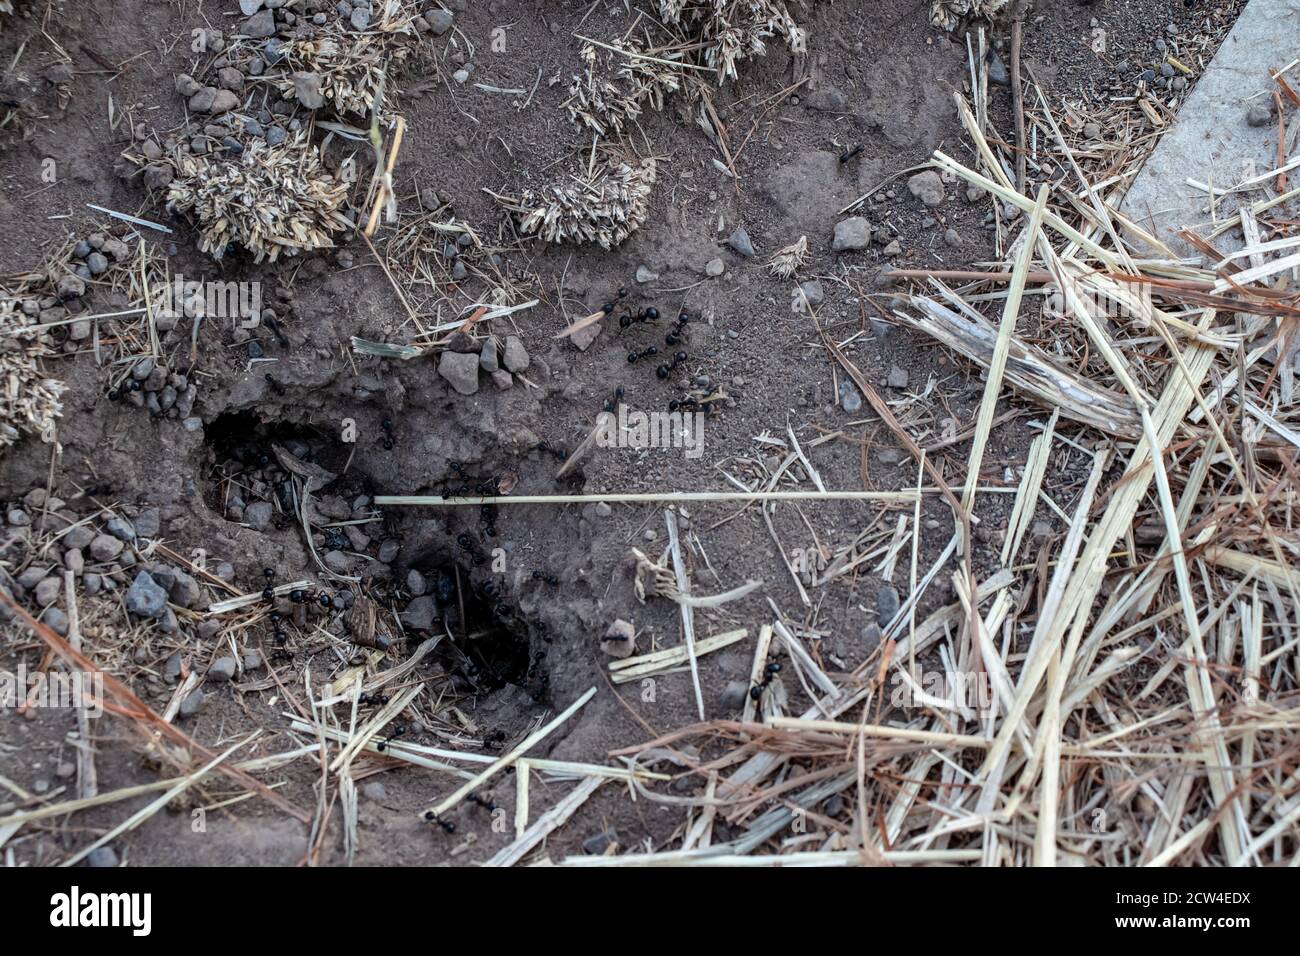 In the flowerbed, an anthill is visible in the foreground. Stock Photo